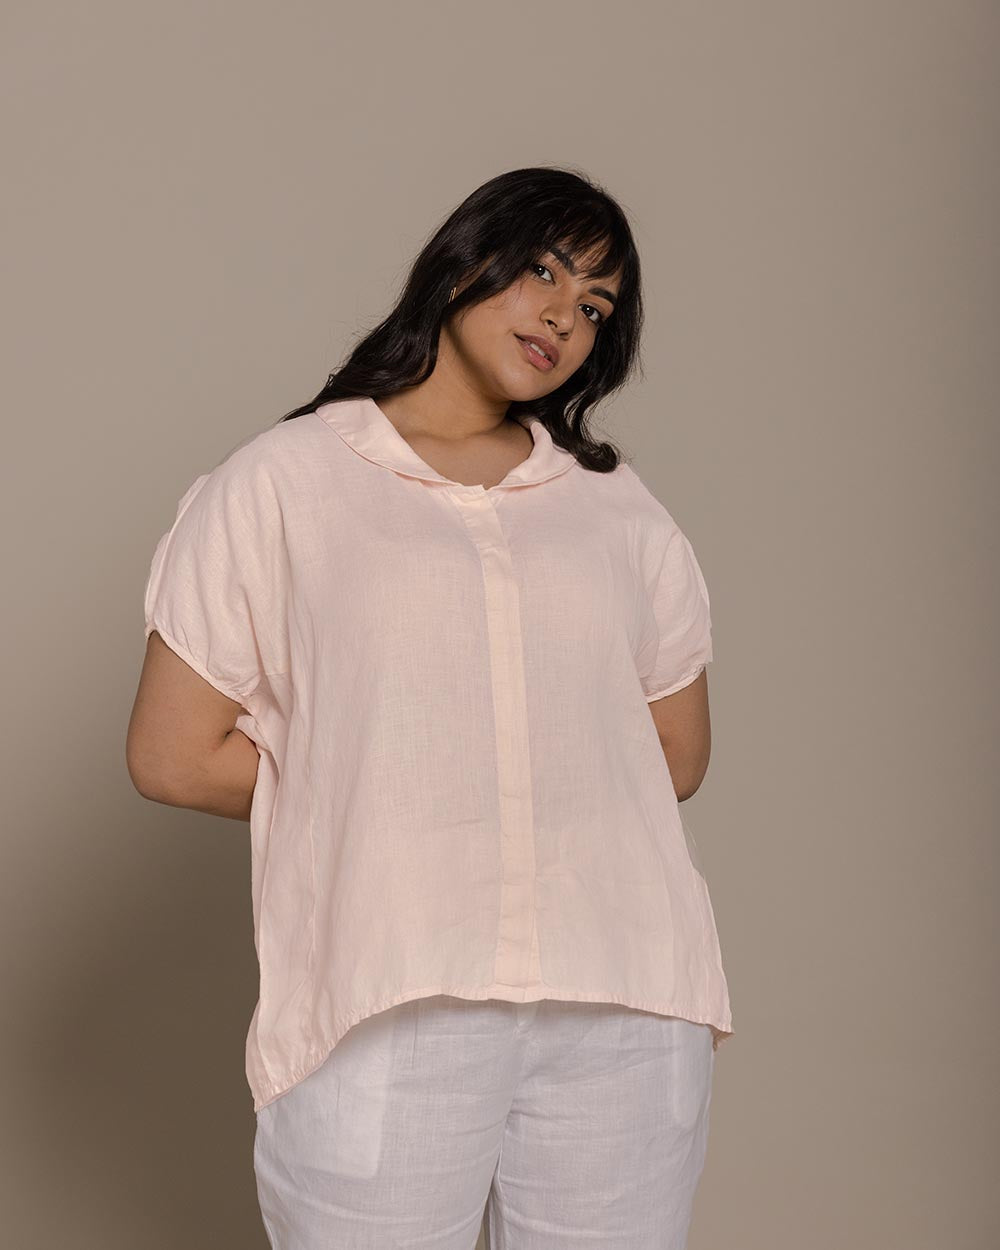 The Morning Coffee Run Shirt - Ice Pink at Kamakhyaa by Reistor. This item is Casual Wear, Hemp, Natural, Pink, Shirts, Solids, Tops, Womenswear